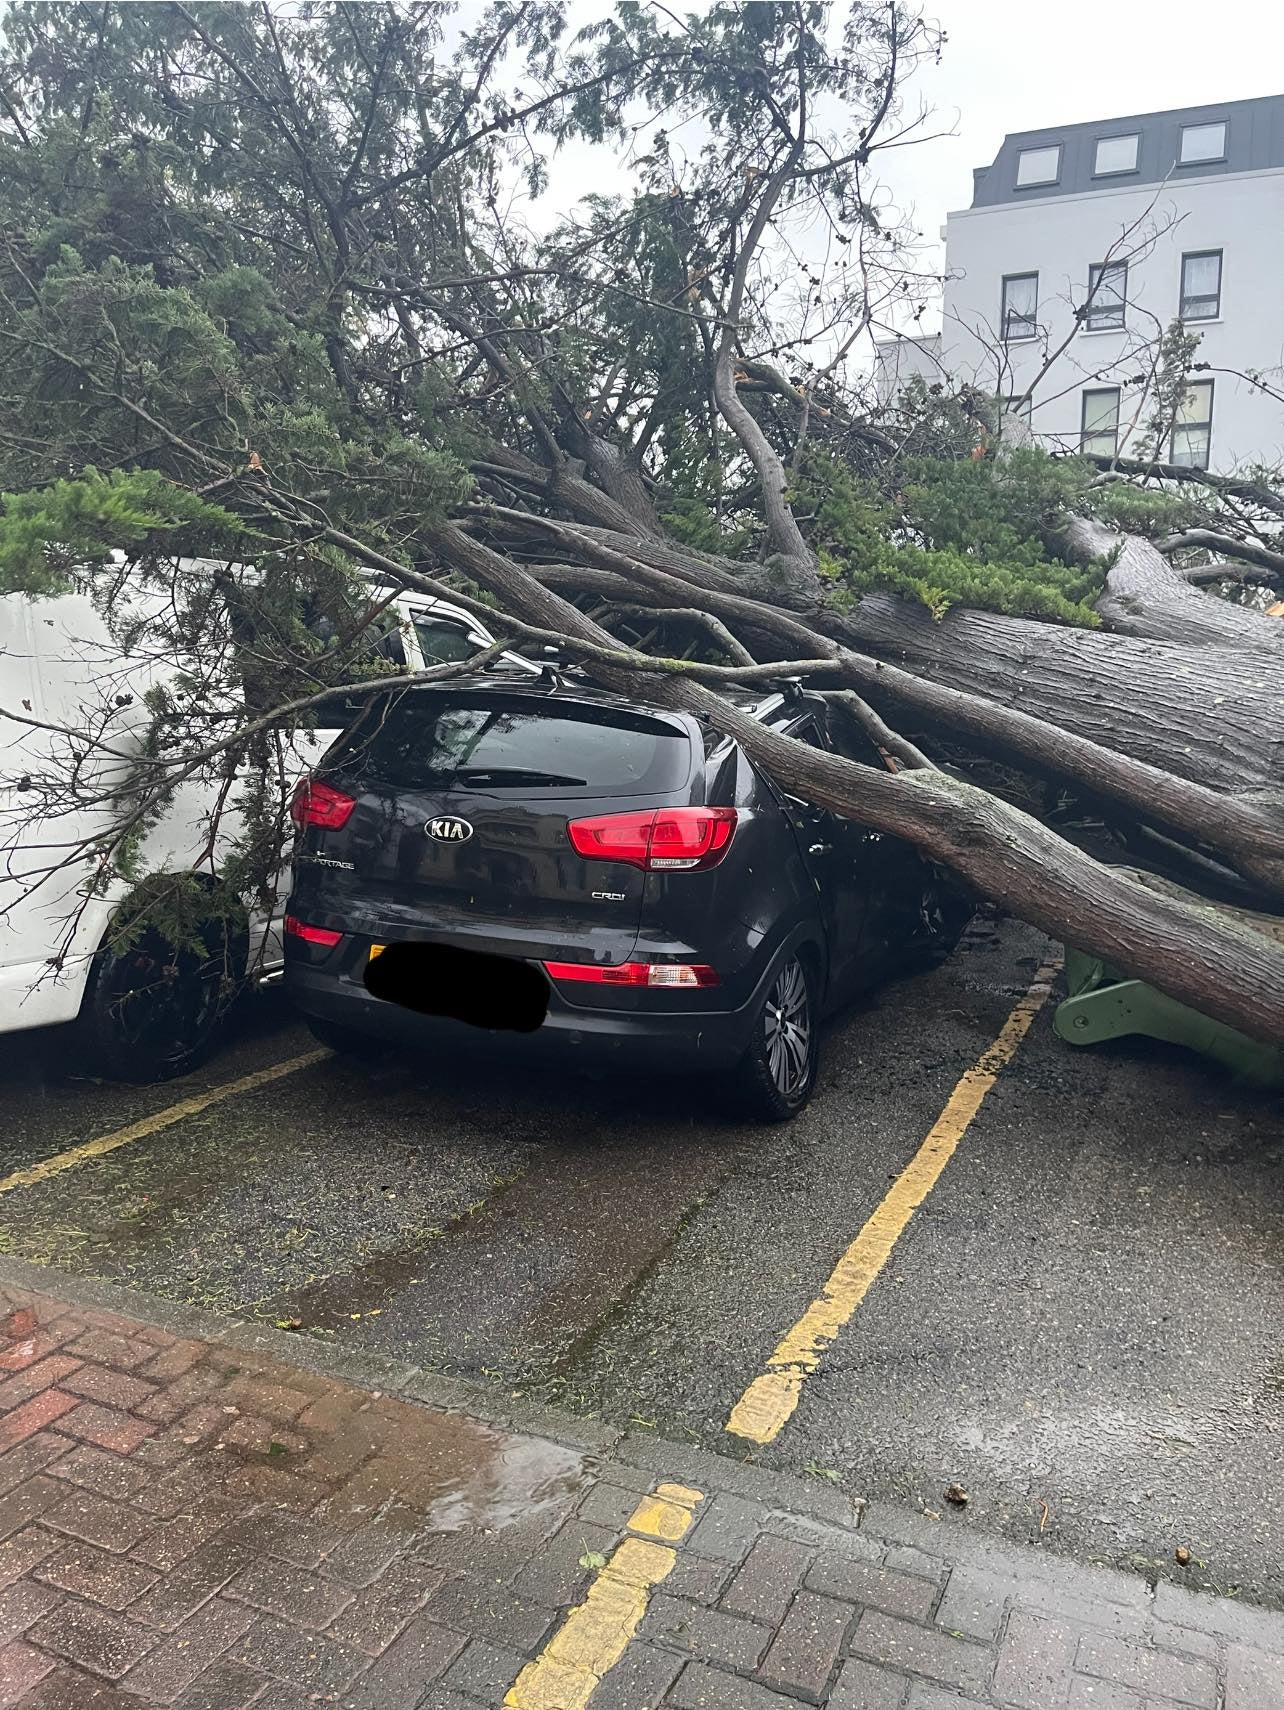 Several residents reported their cars had been severely damaged in the storm